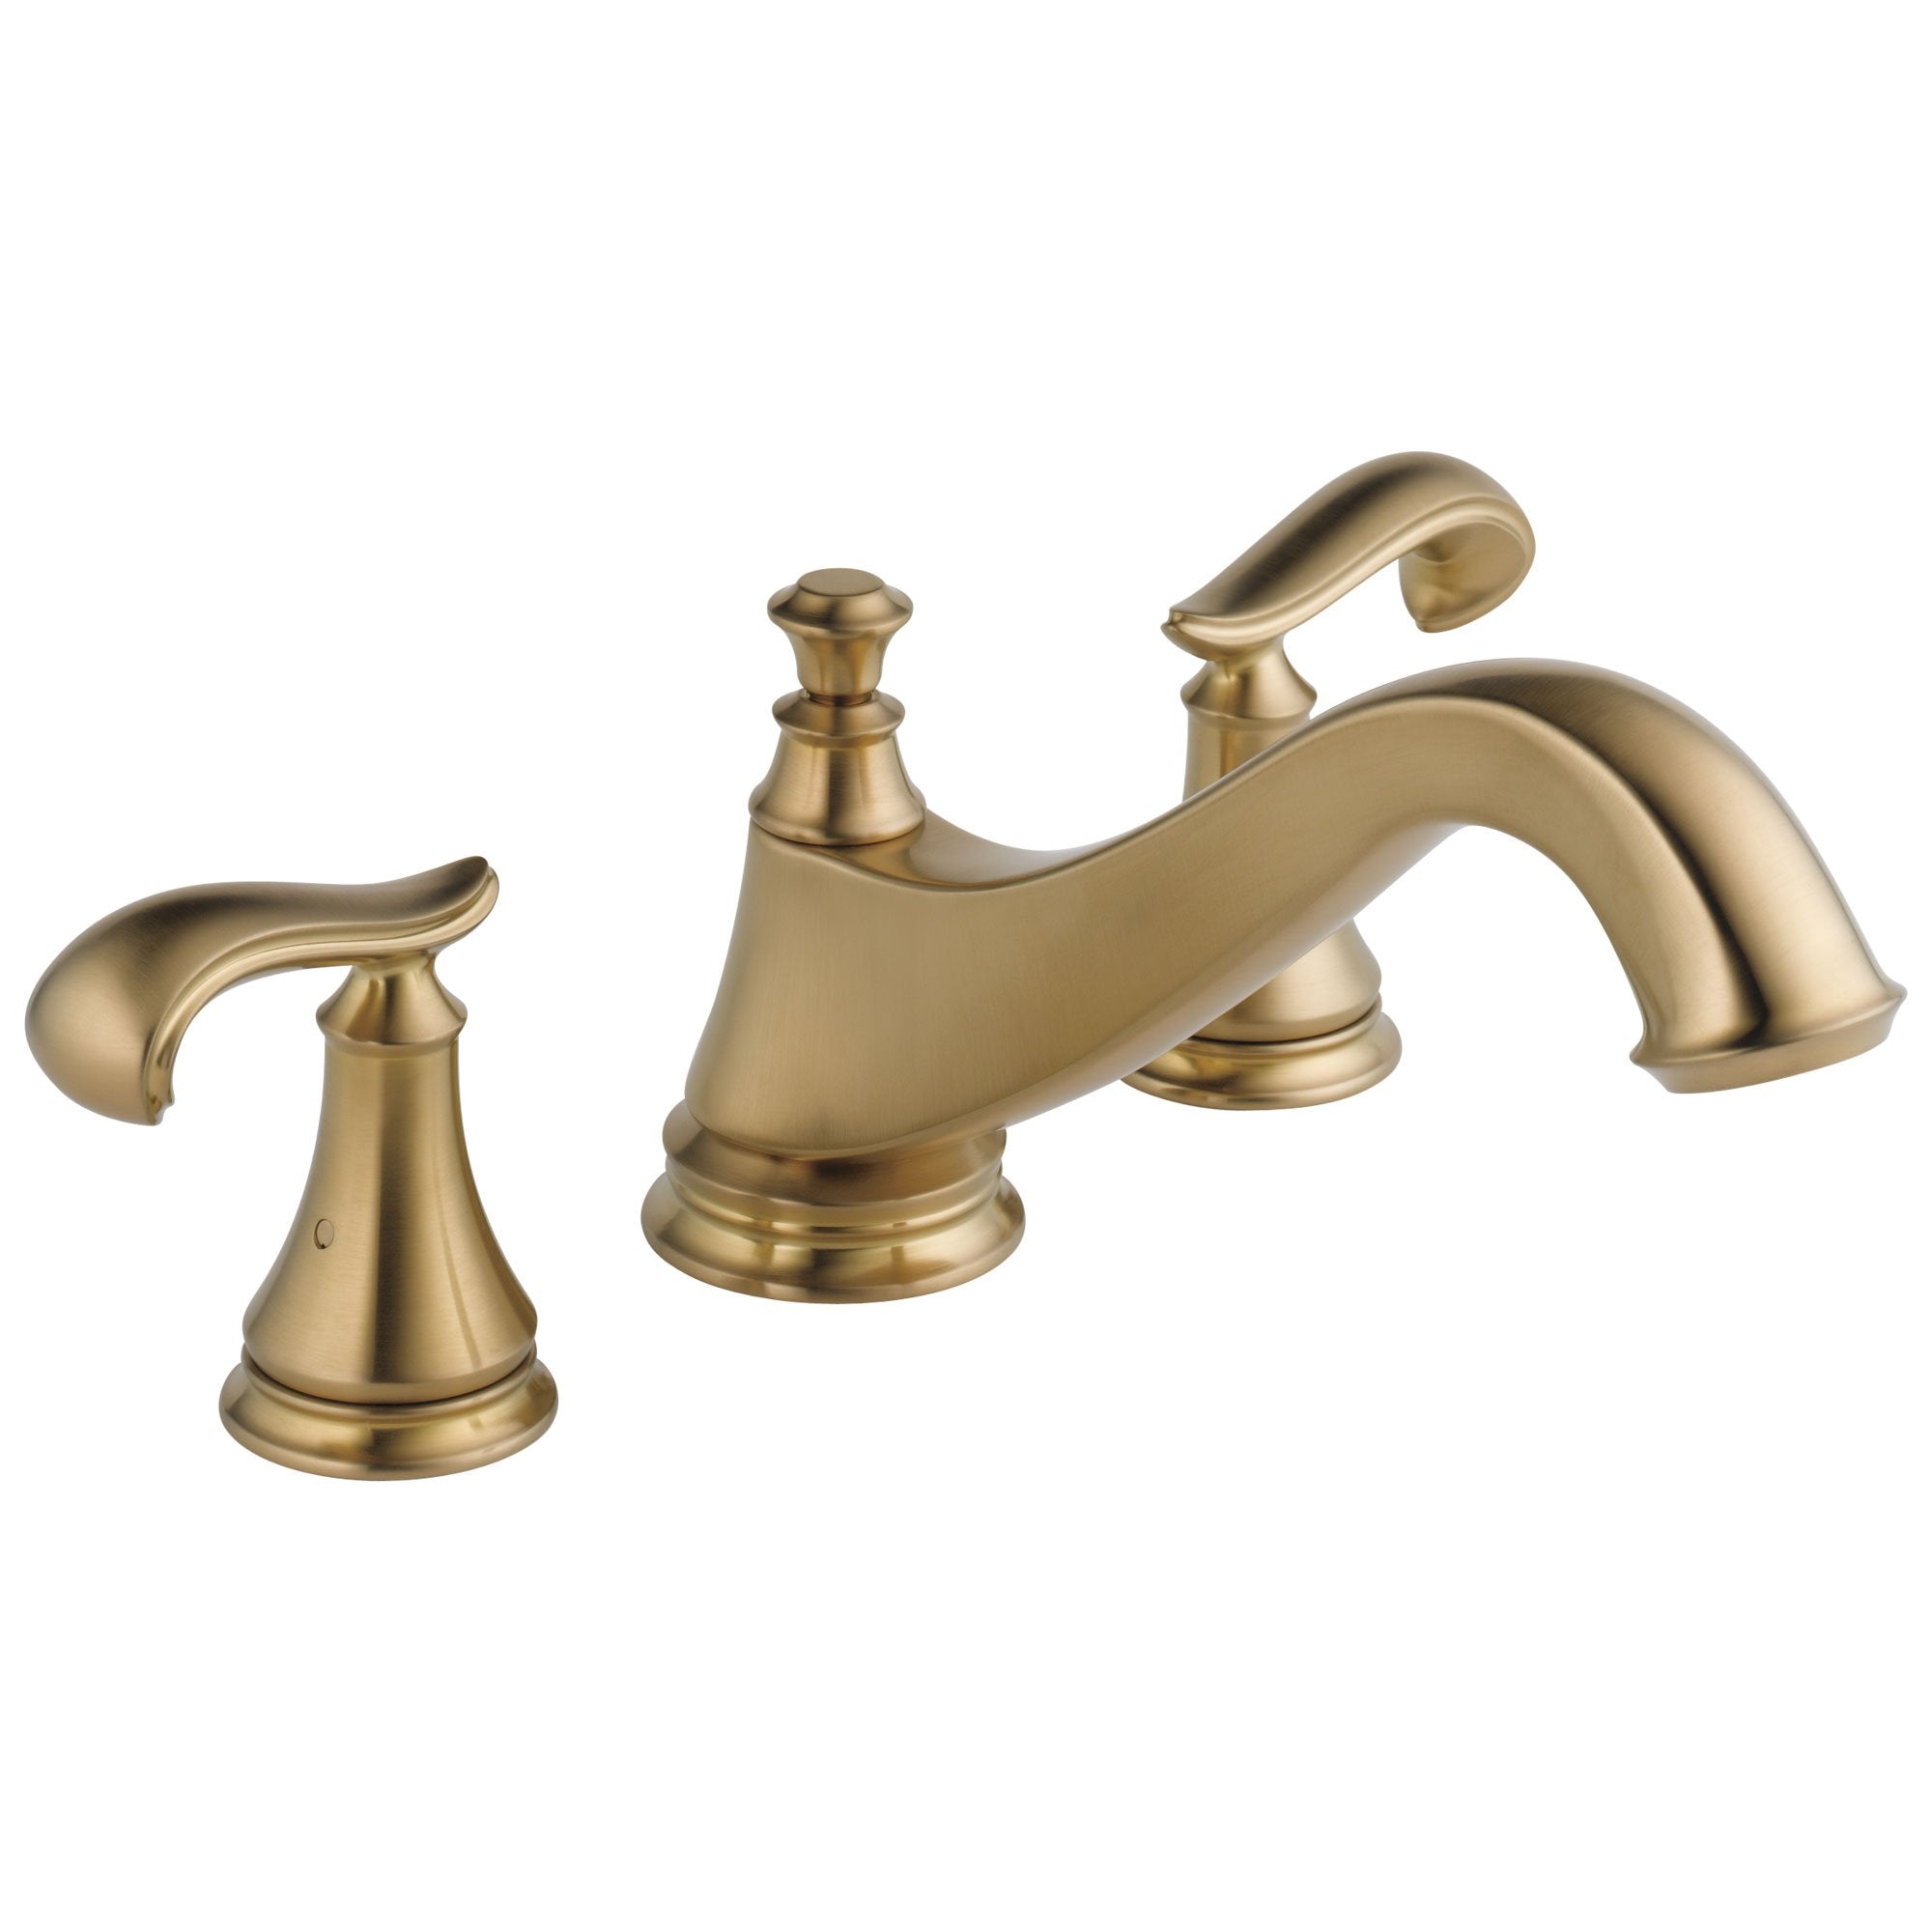 Delta Cassidy Collection Champagne Bronze Finish Traditional Spout Roman Tub Filler Faucet COMPLETE ITEM Includes (2) French Scroll Levers and Rough-in Valve D1453V